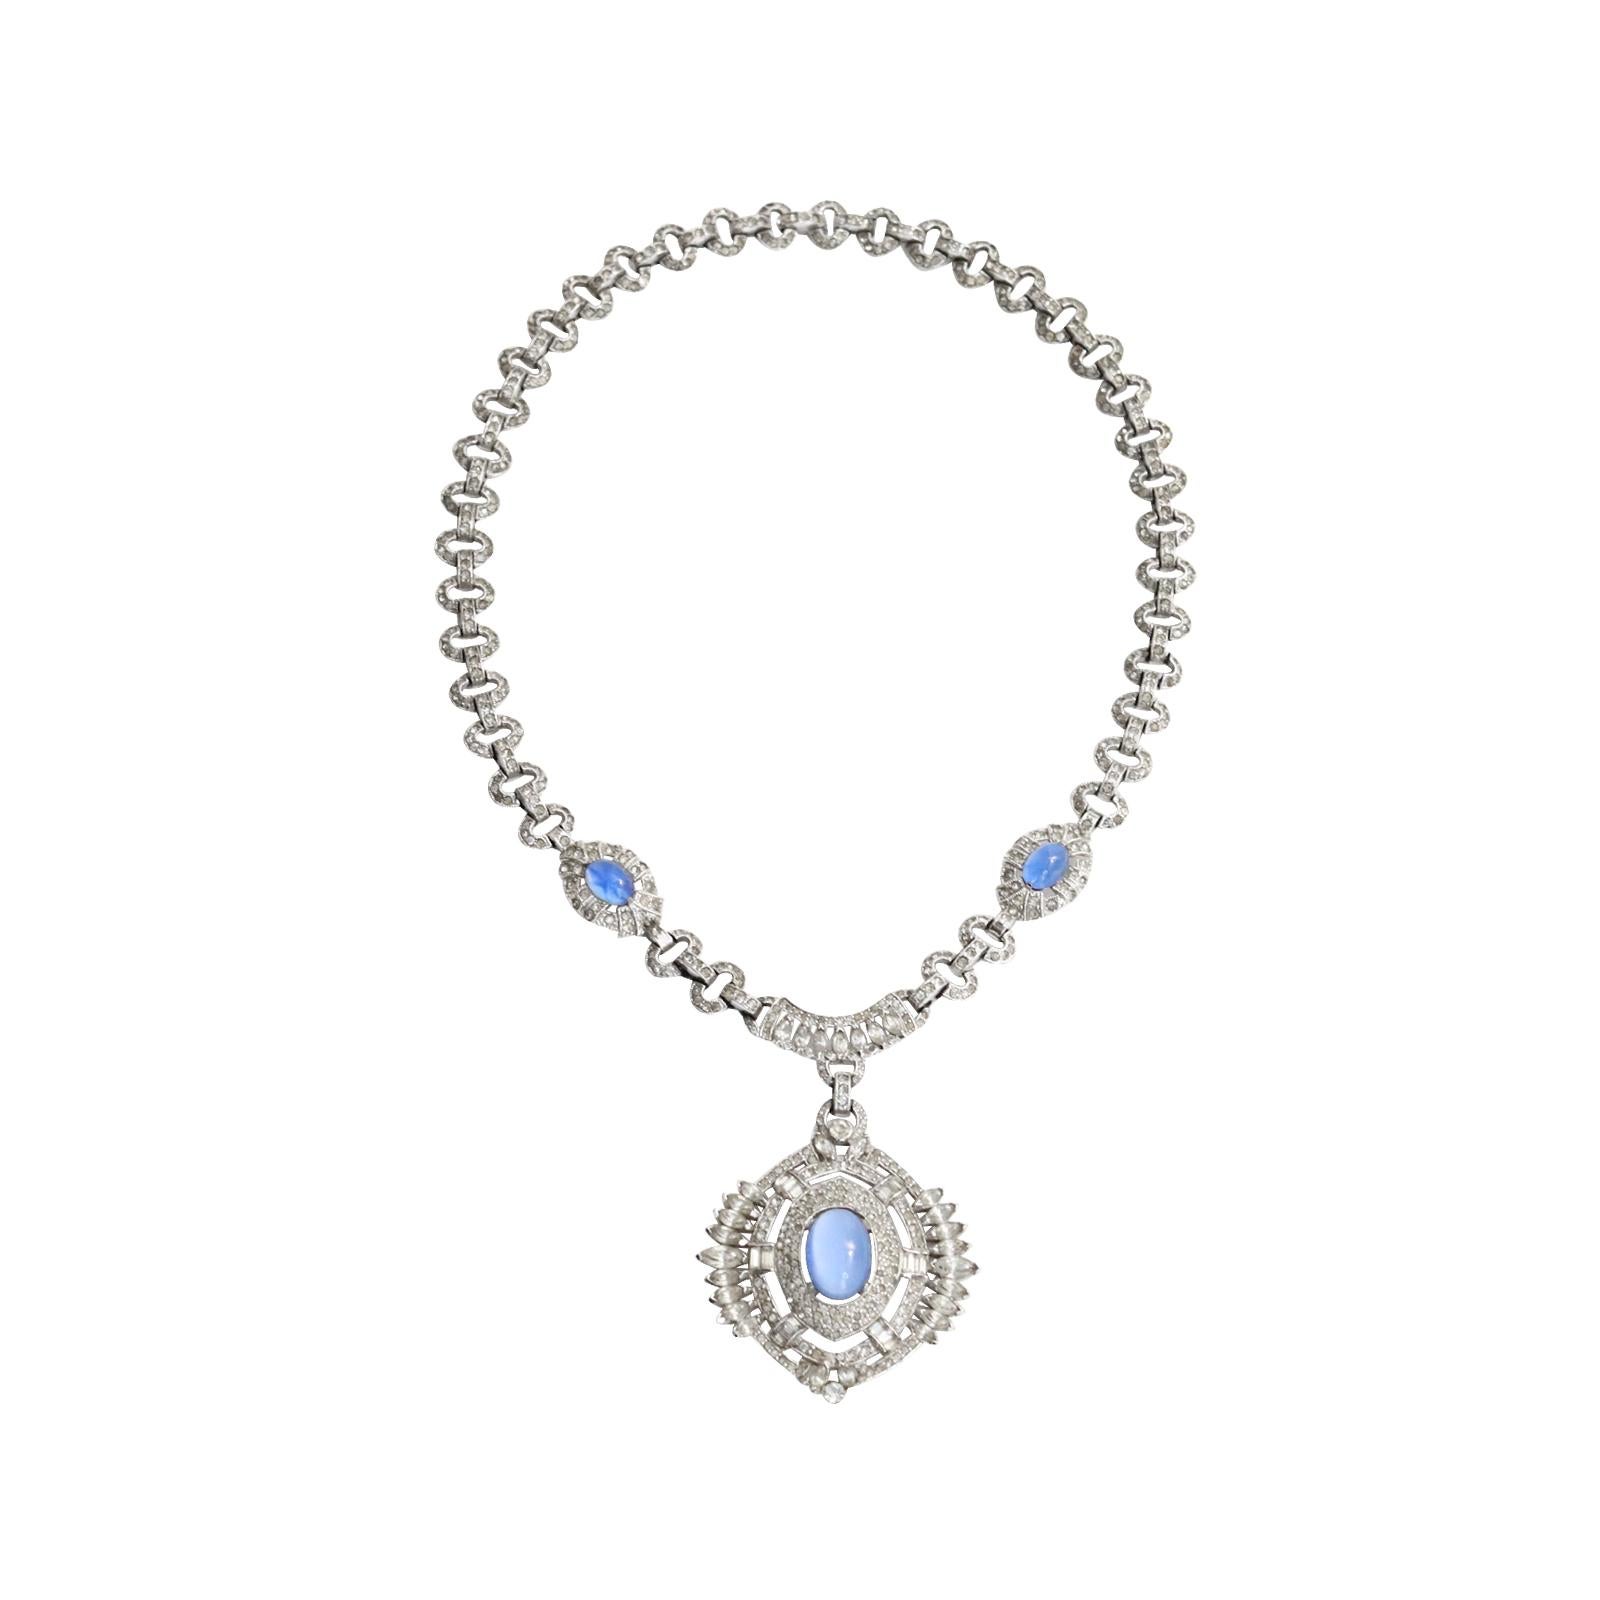 Vintage Diamante with Blue Shiny Cabochon Dangling Pendant Necklace Circa 1960s. This Gorgeous piece has al different cuts of stones including pave, and pear and then has three blue shiny cabochons that are in such perfect shape and truly look like